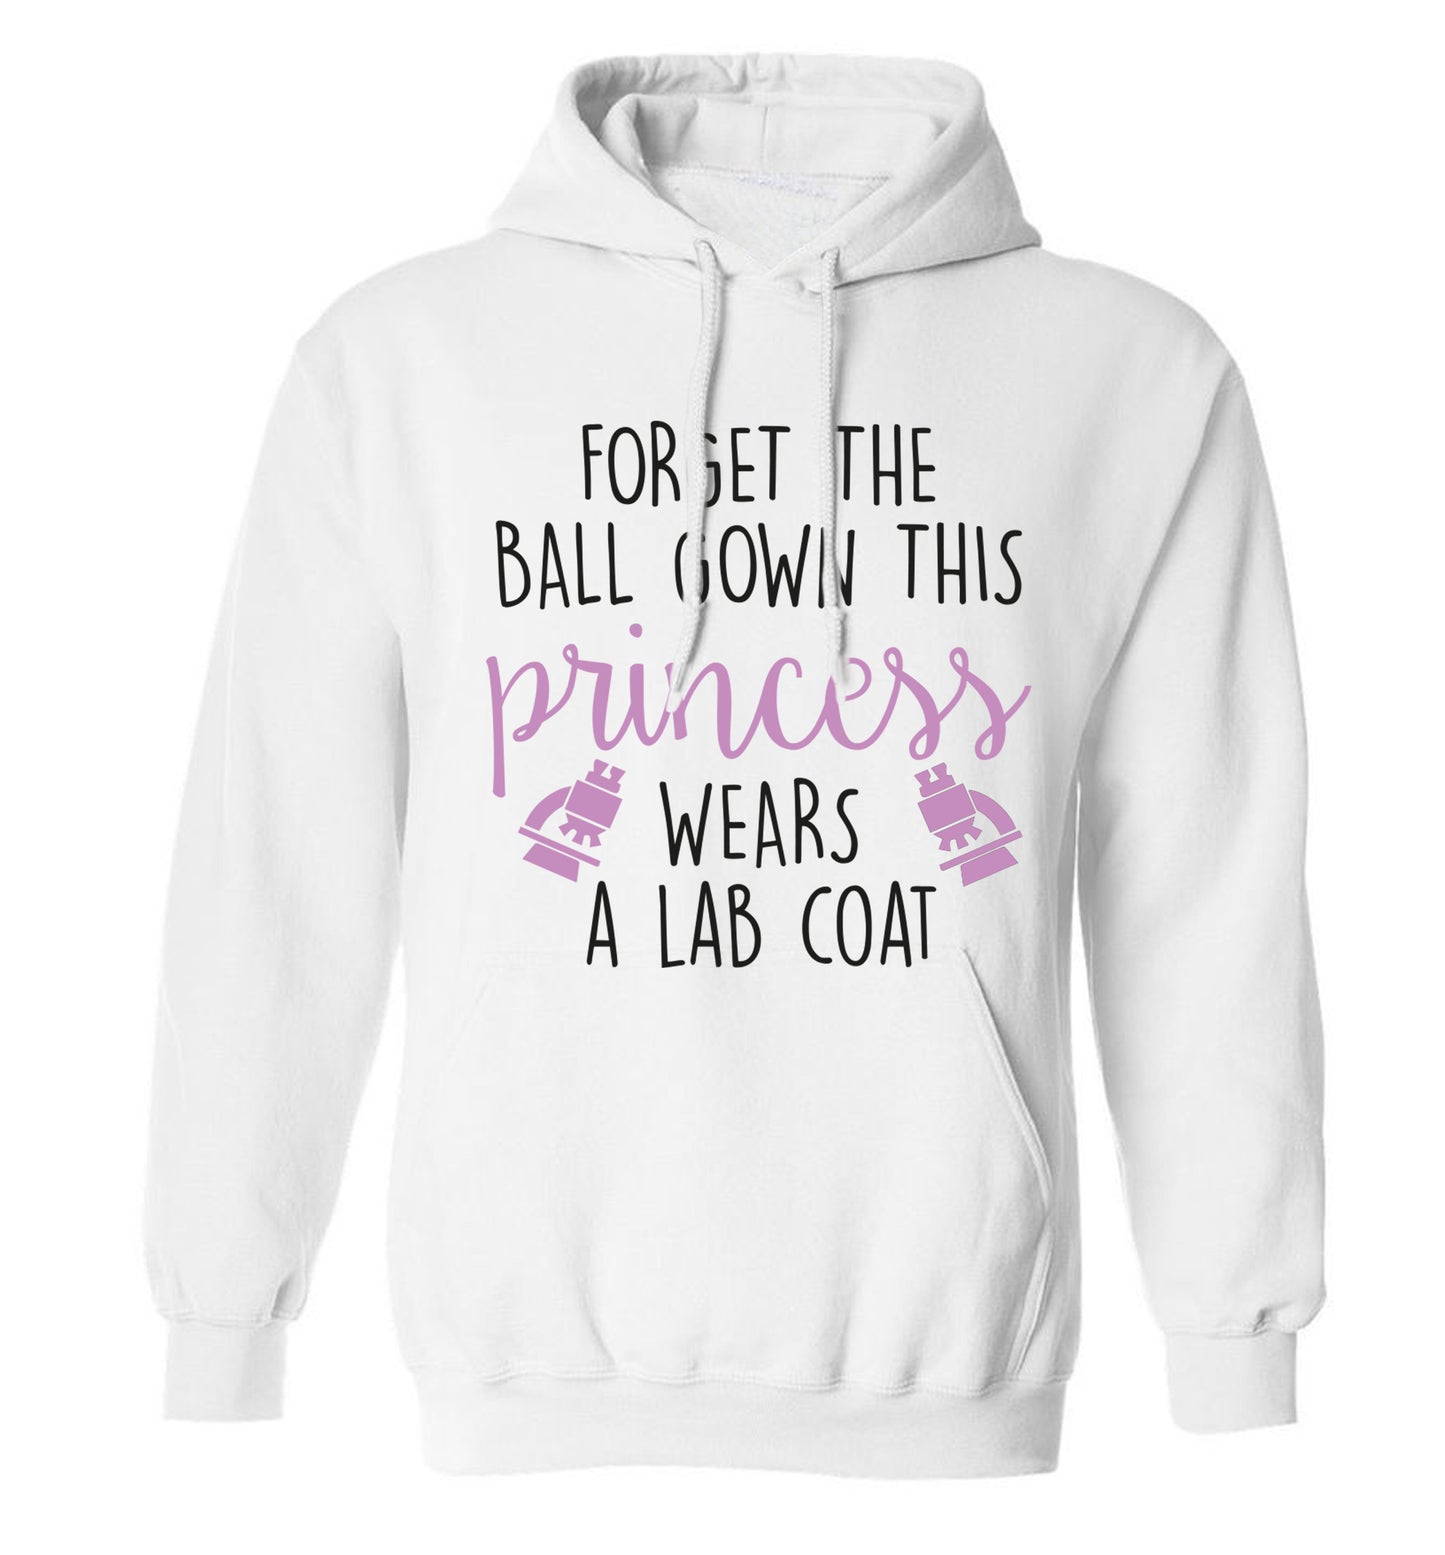 Forget the ball gown this princess wears a lab coat adults unisex white hoodie 2XL